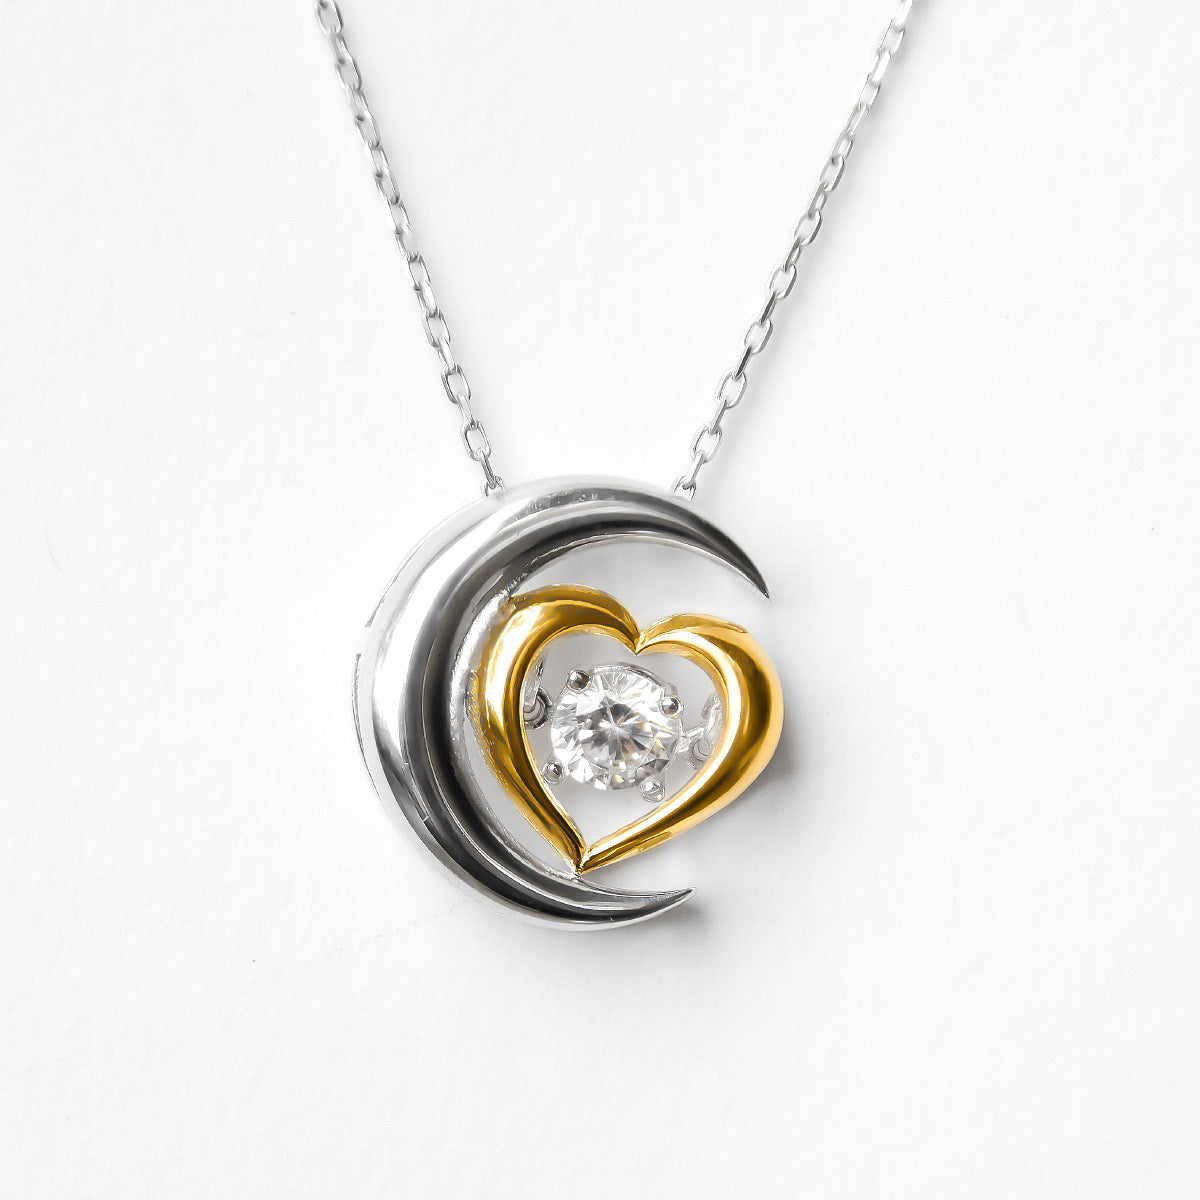 To the Moon - Dancing Crystal Moon Heart Necklace Gift Set